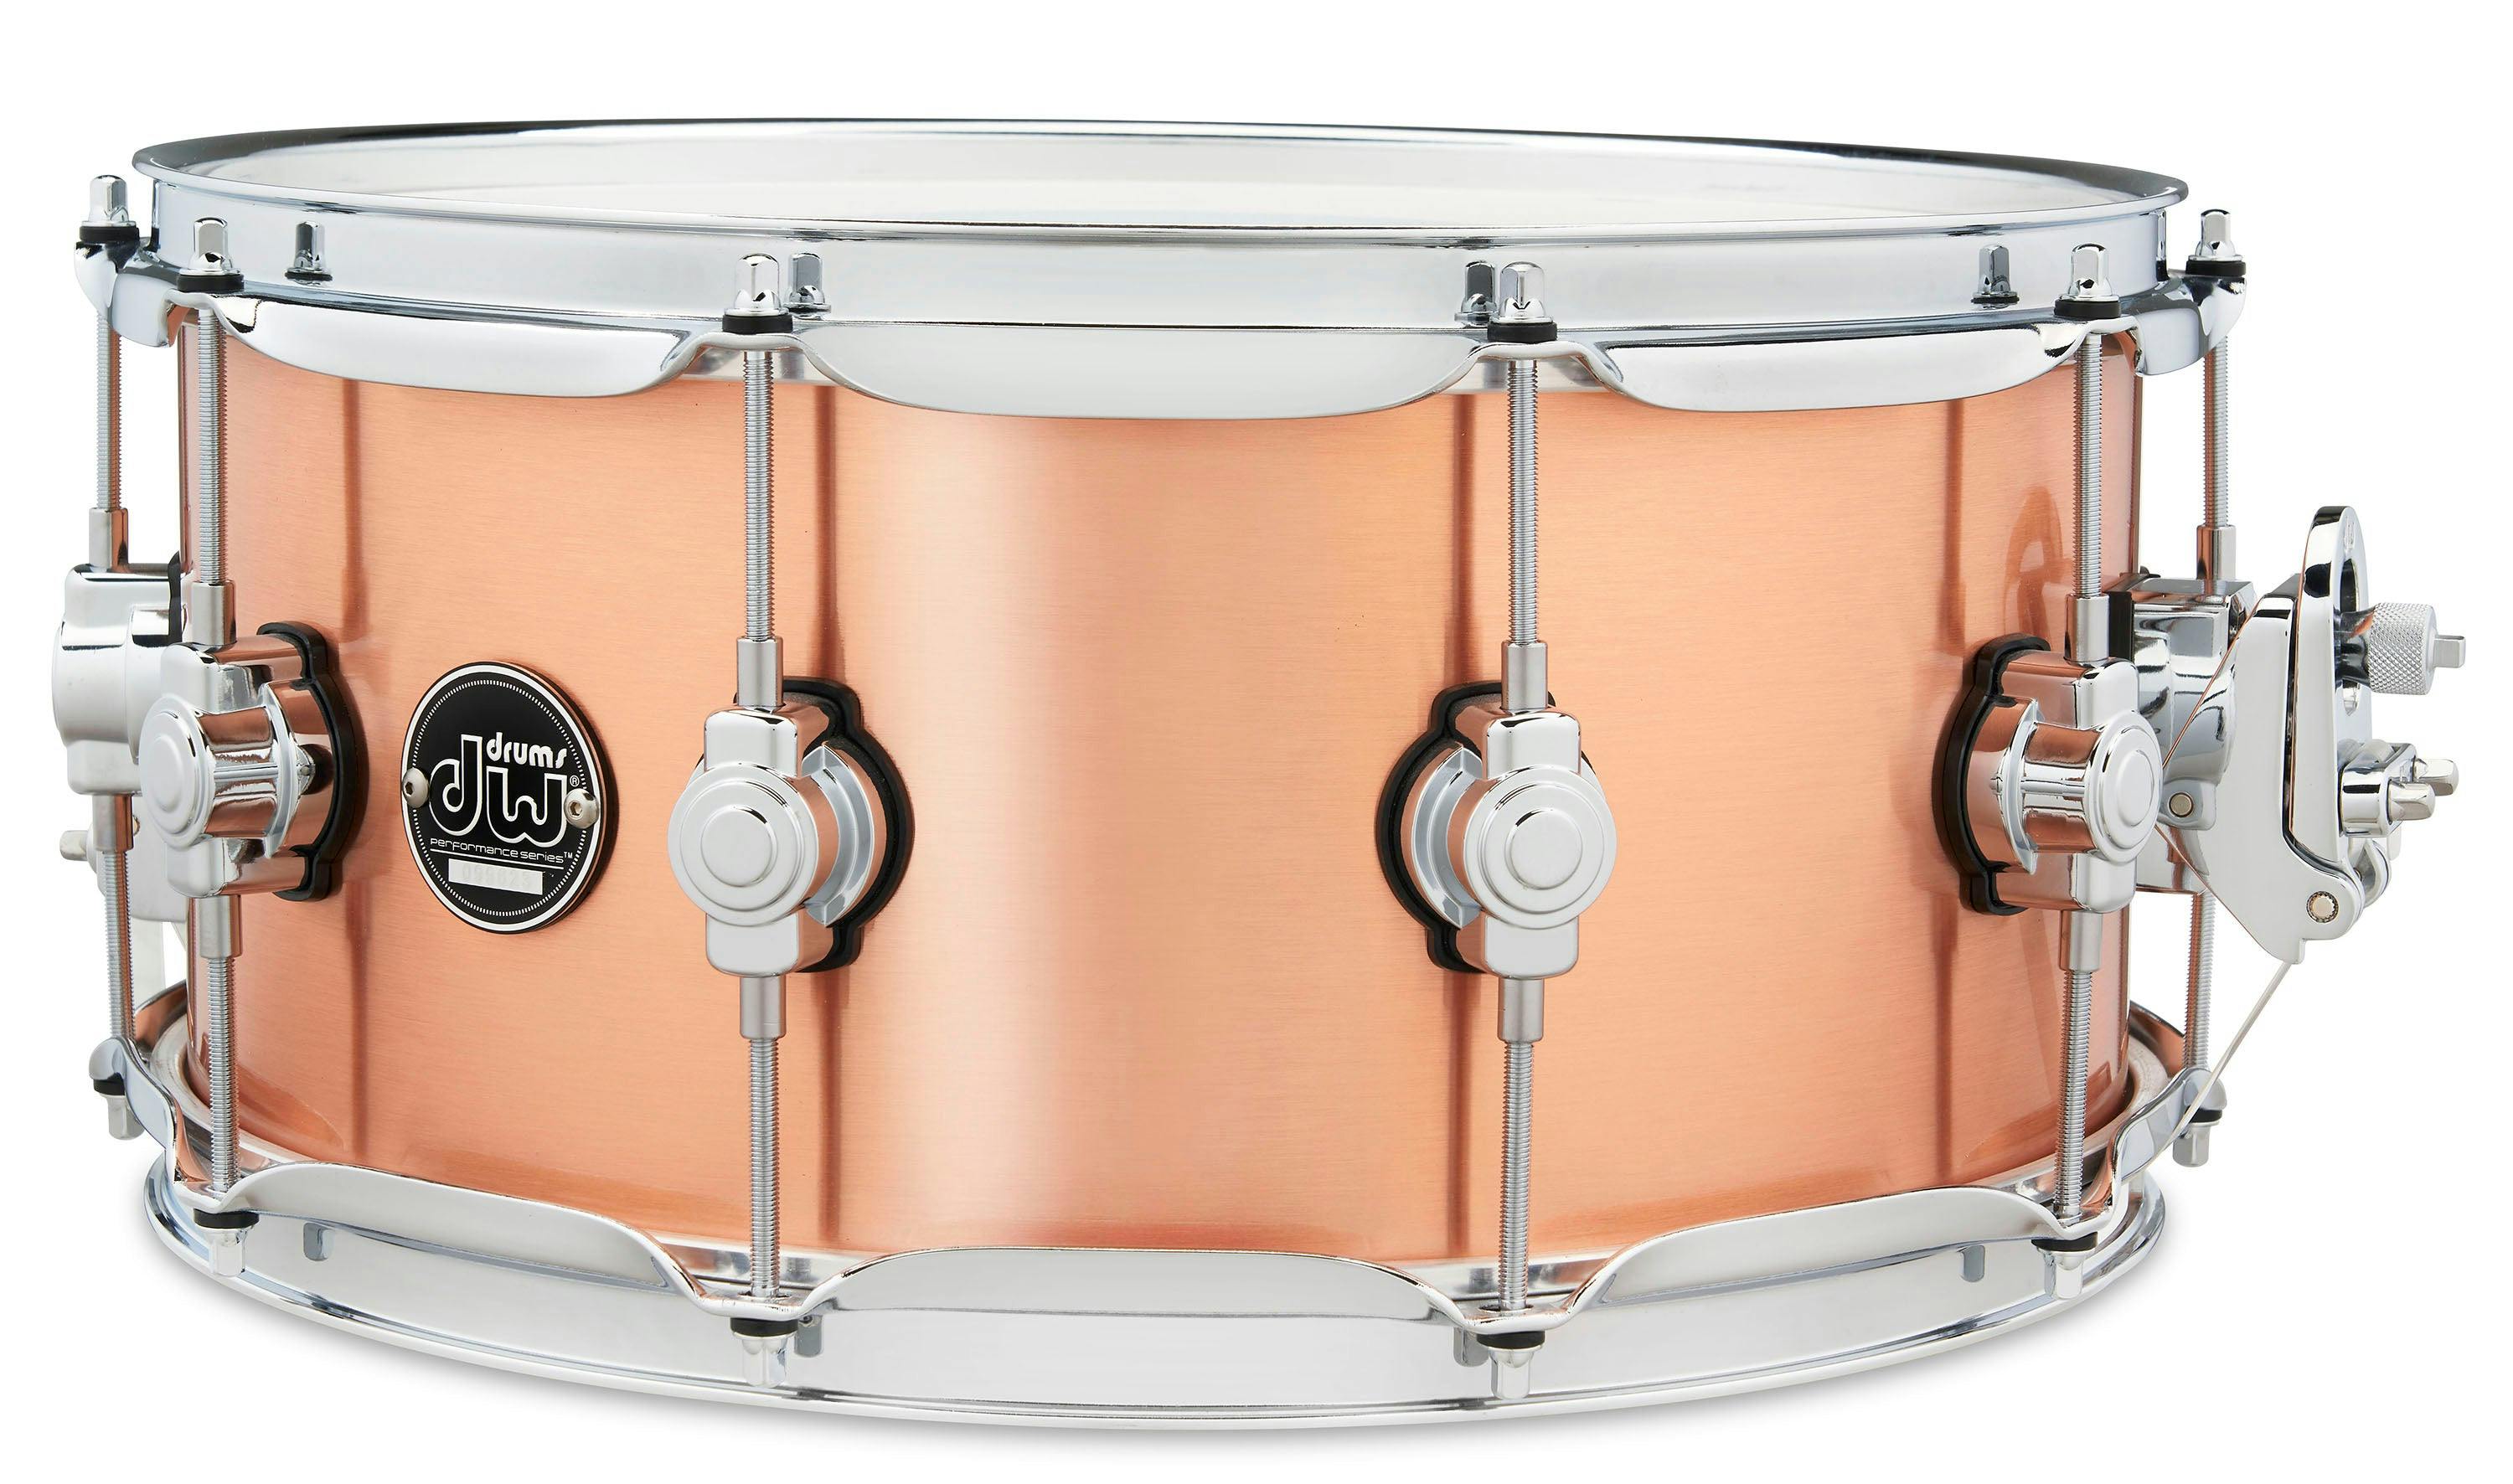 PartId DRPM6514SSCP - Performance Copper Snare Drum 6 5x14 Product Image